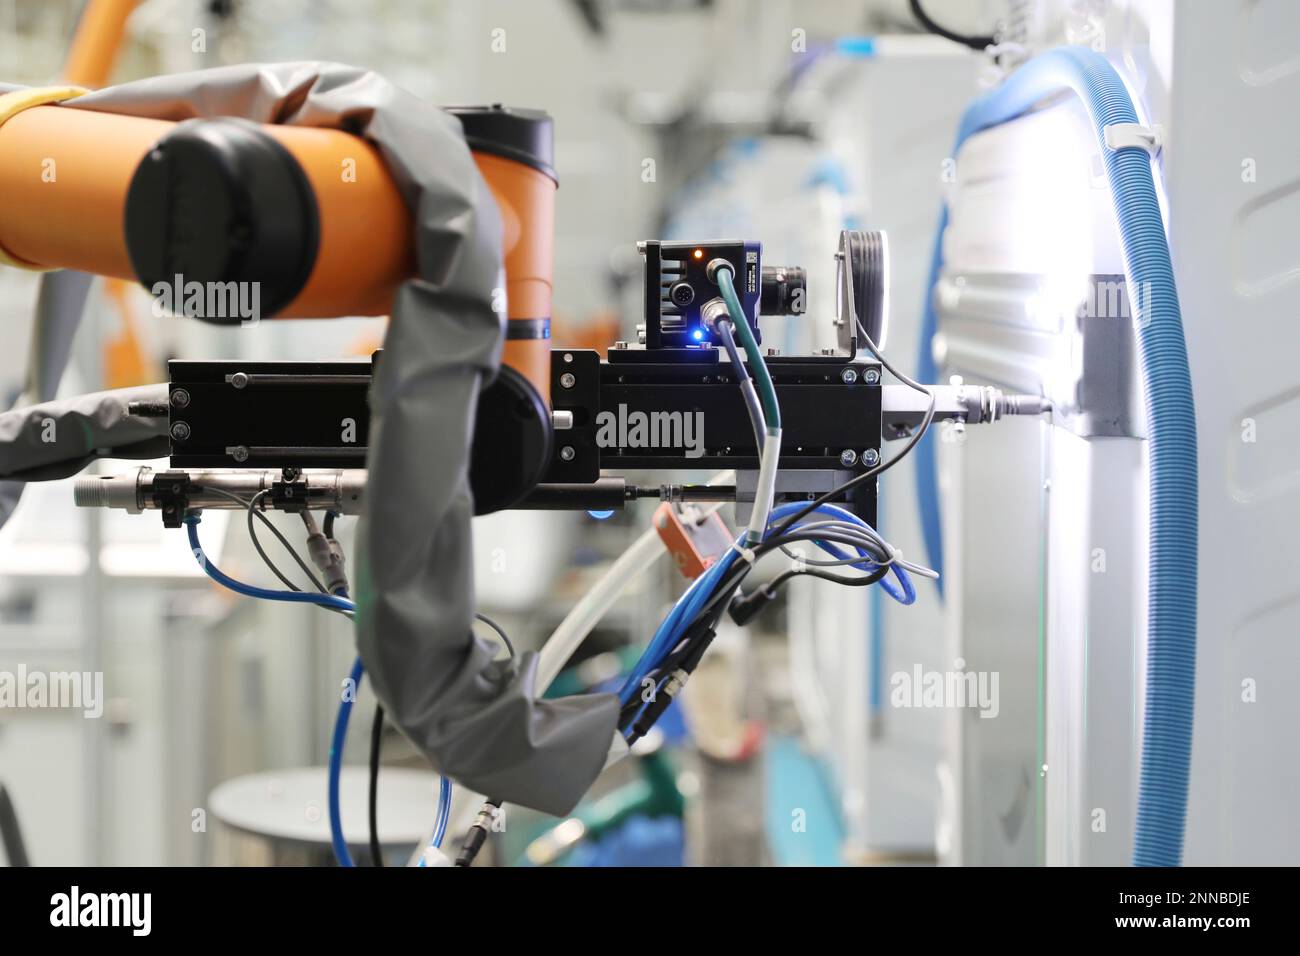 A robot arm with vision works on the assembly line of washing machines at a  5G plant of the home appliance maker Haier in Qingdao in east China's  Shandong province Tuesday, May